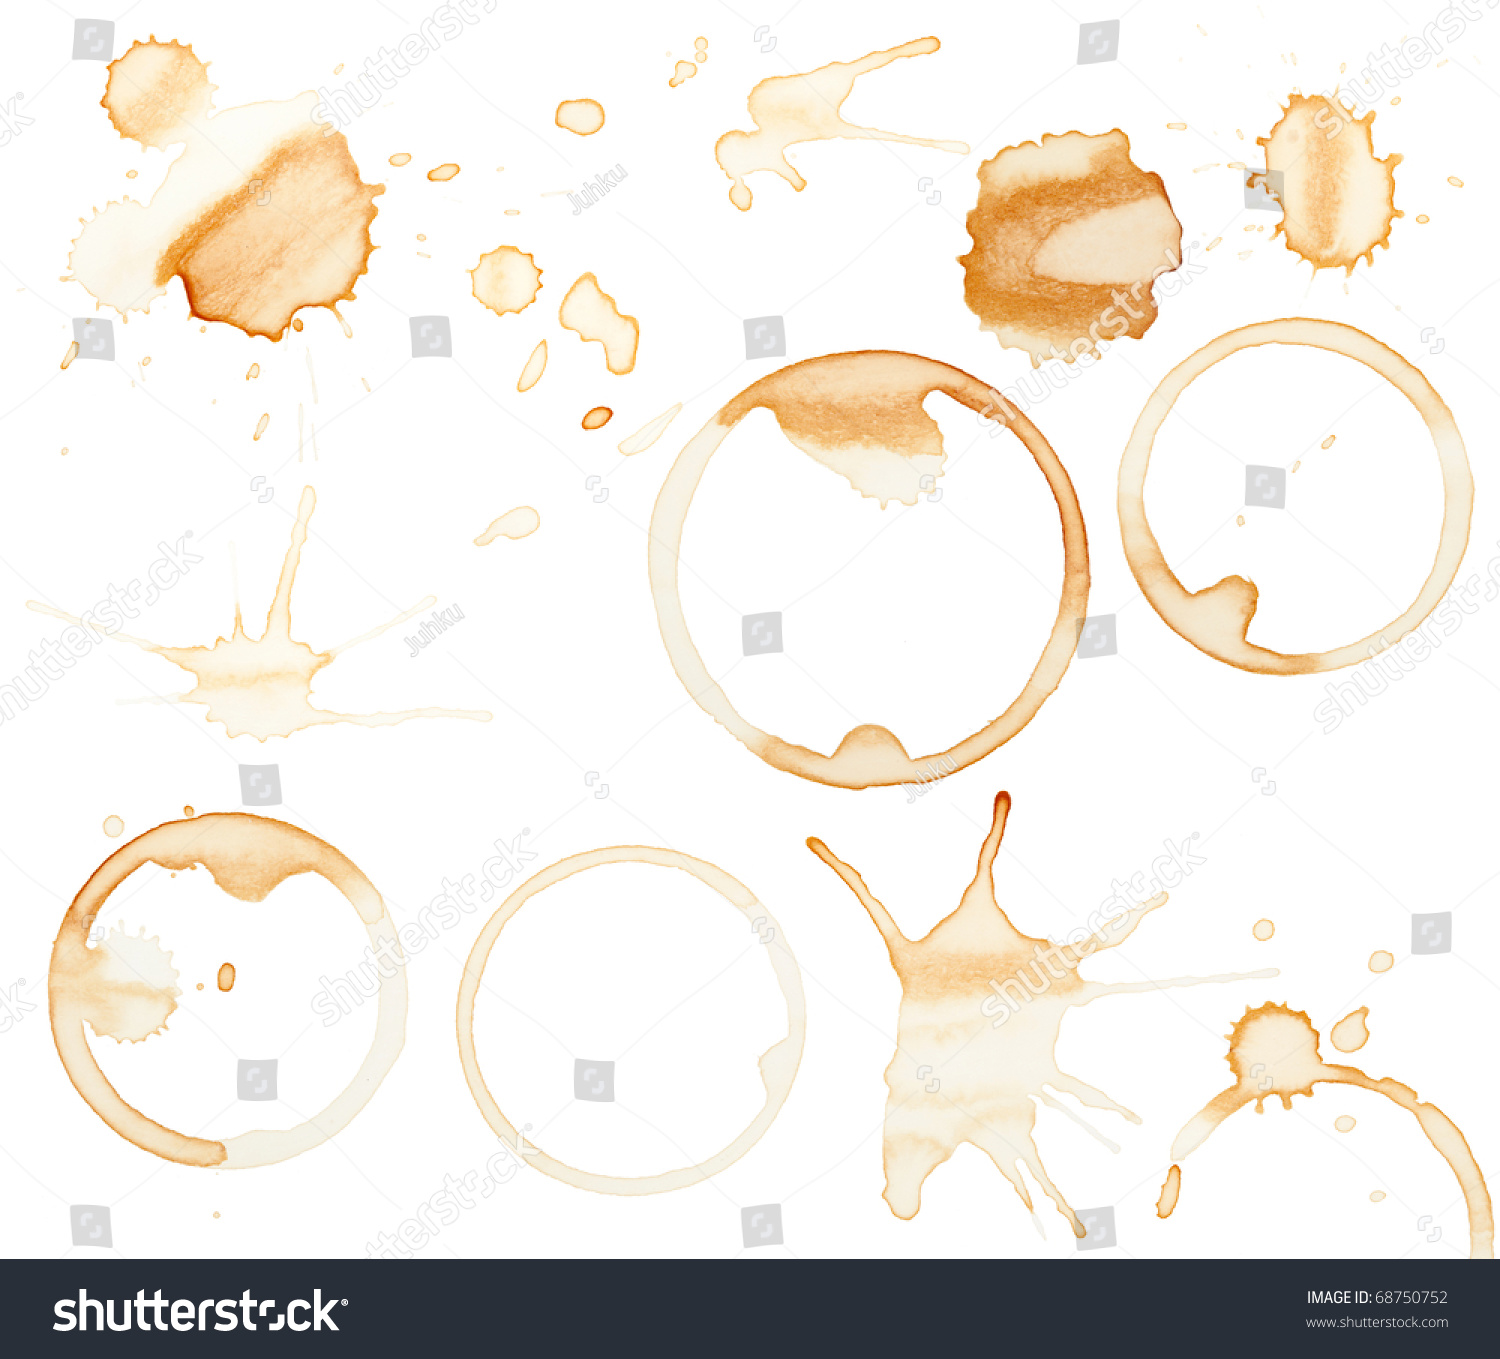 Coffee stains and splatters design pack #68750752